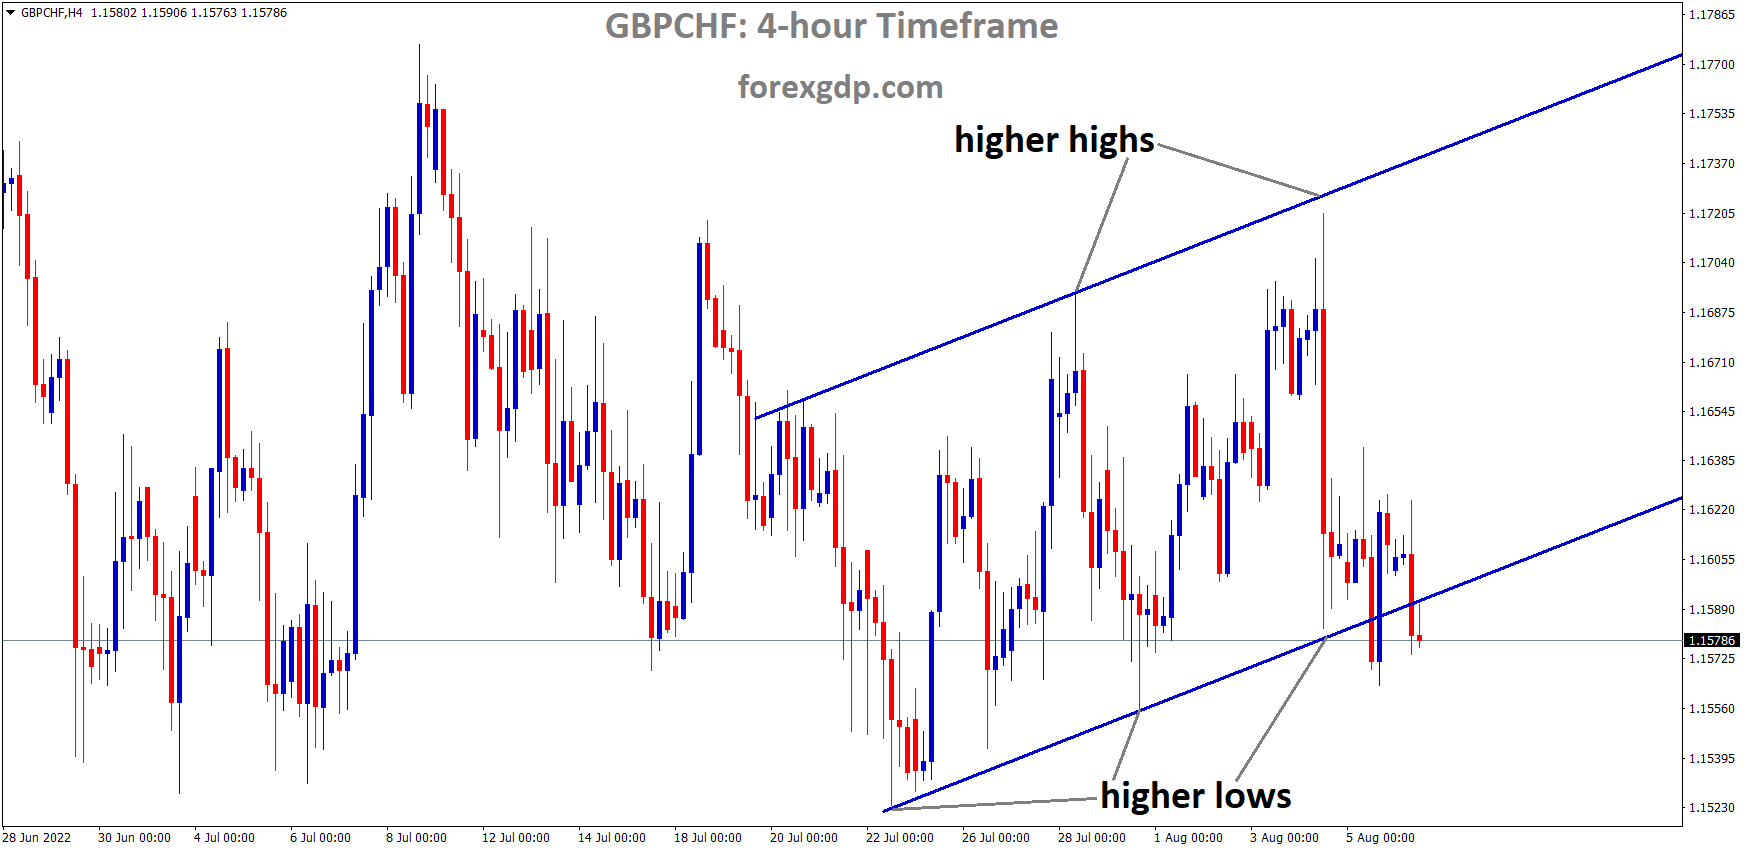 GBPCHF is moving in an Ascending channel and the Market has reached the higher low area of the channel